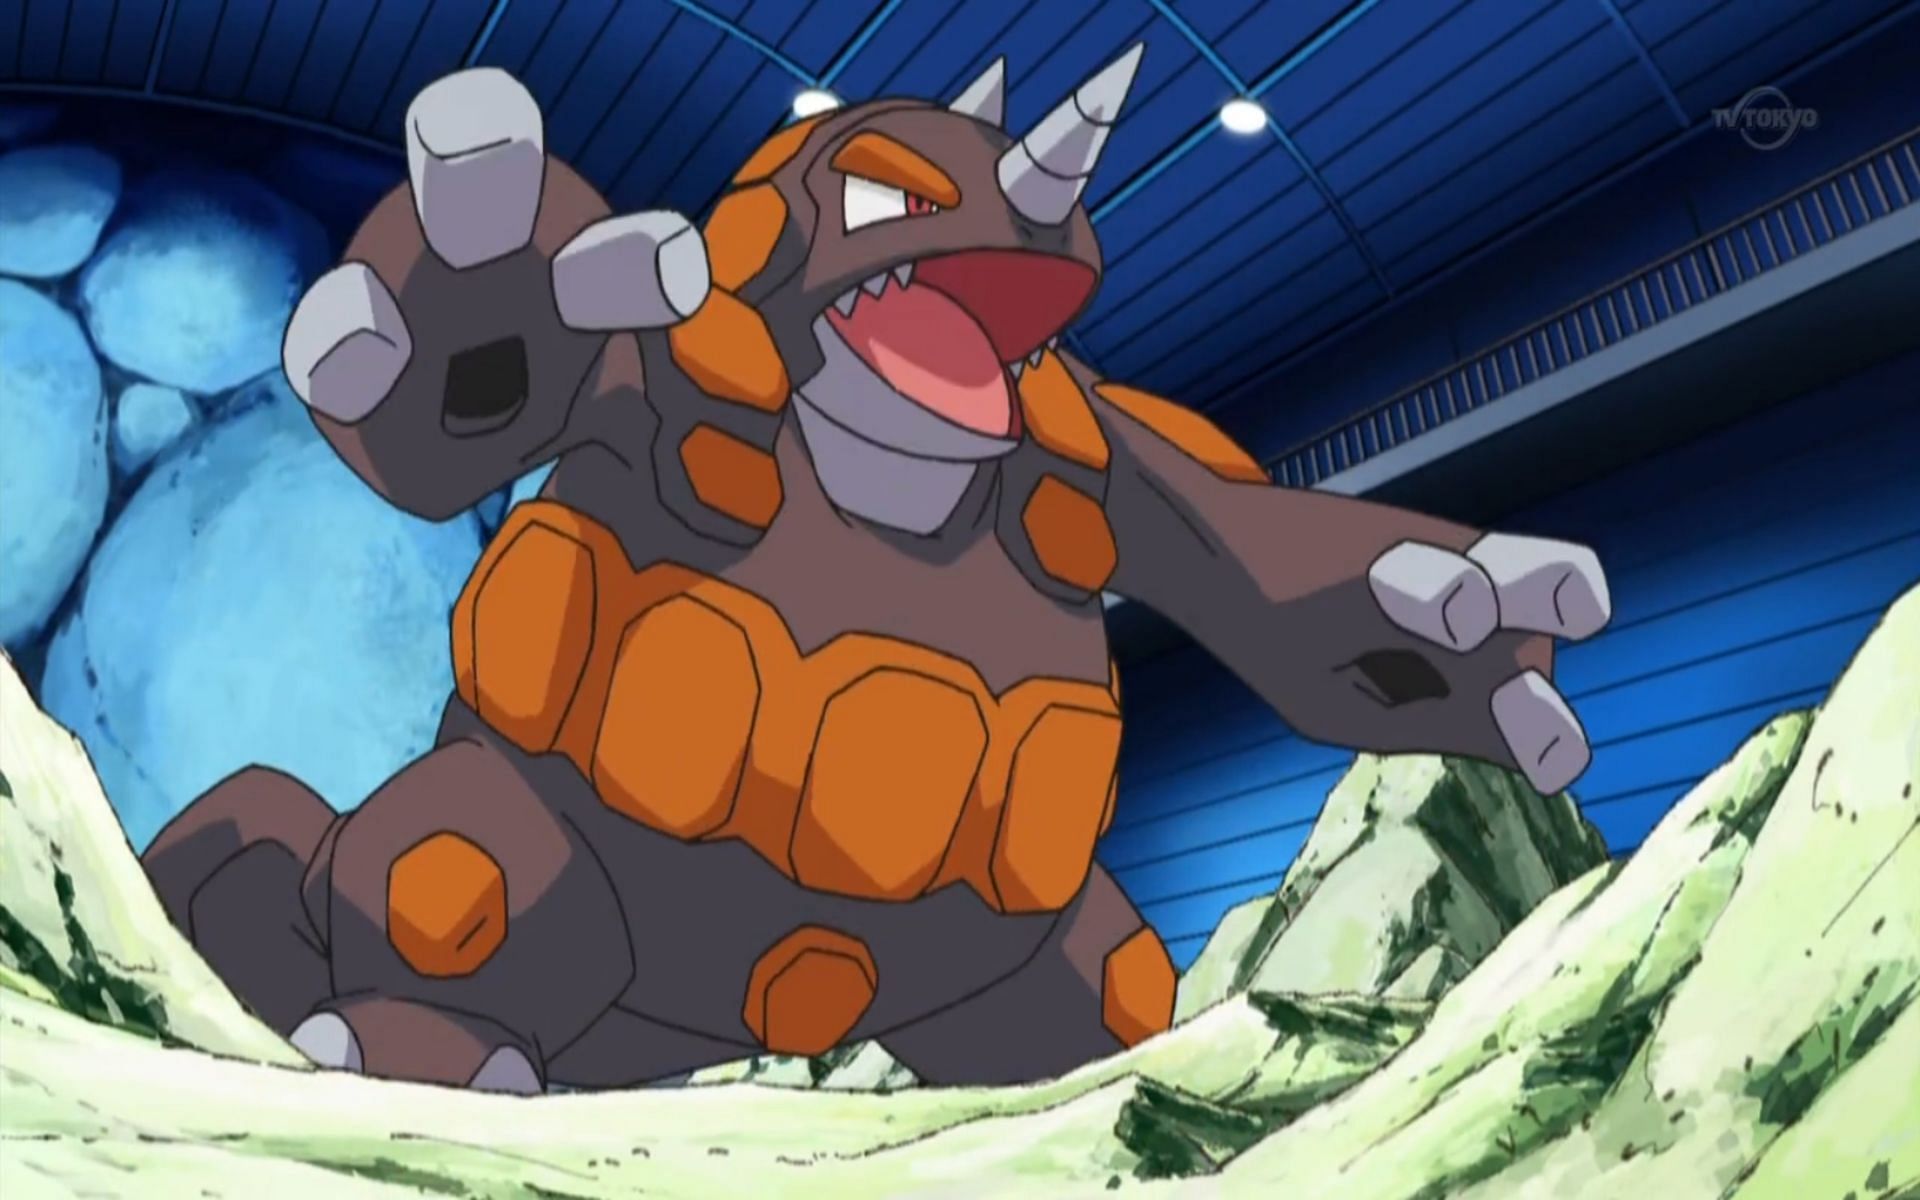 Rhyperior was a new evolution for Rhydon (Image via The Pokemon Company)